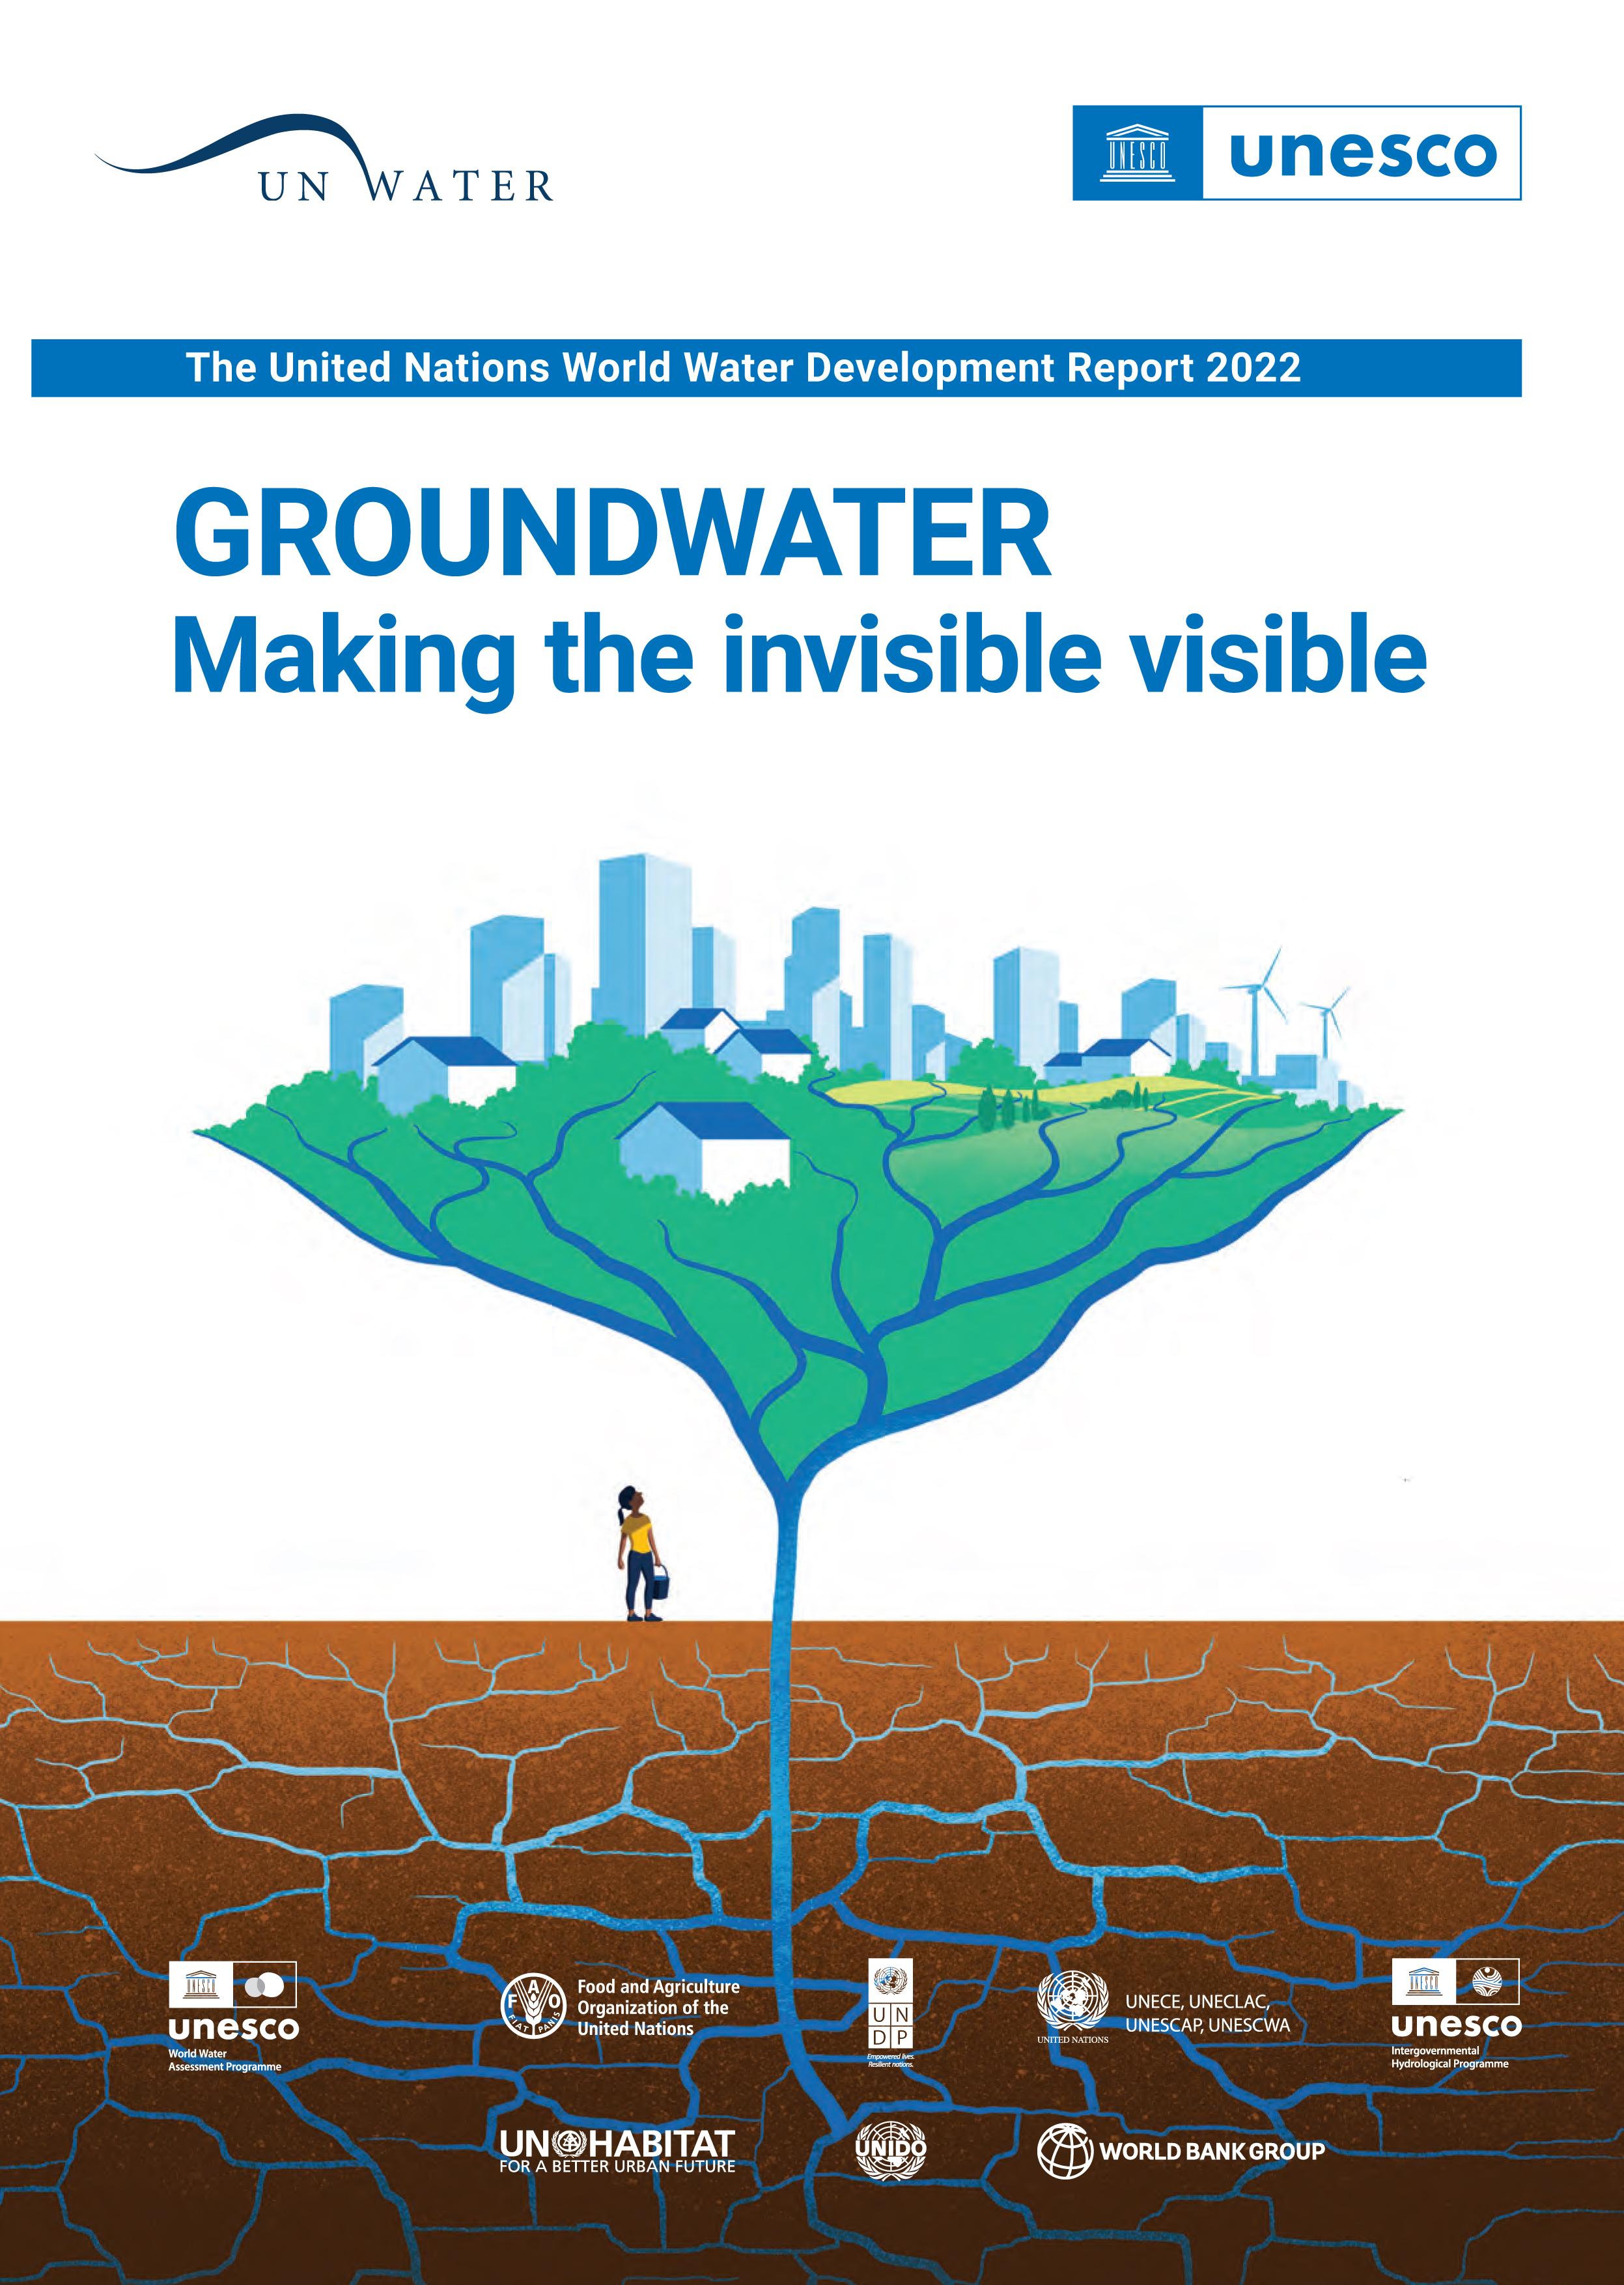 image of The United Nations World Water Development Report 2022